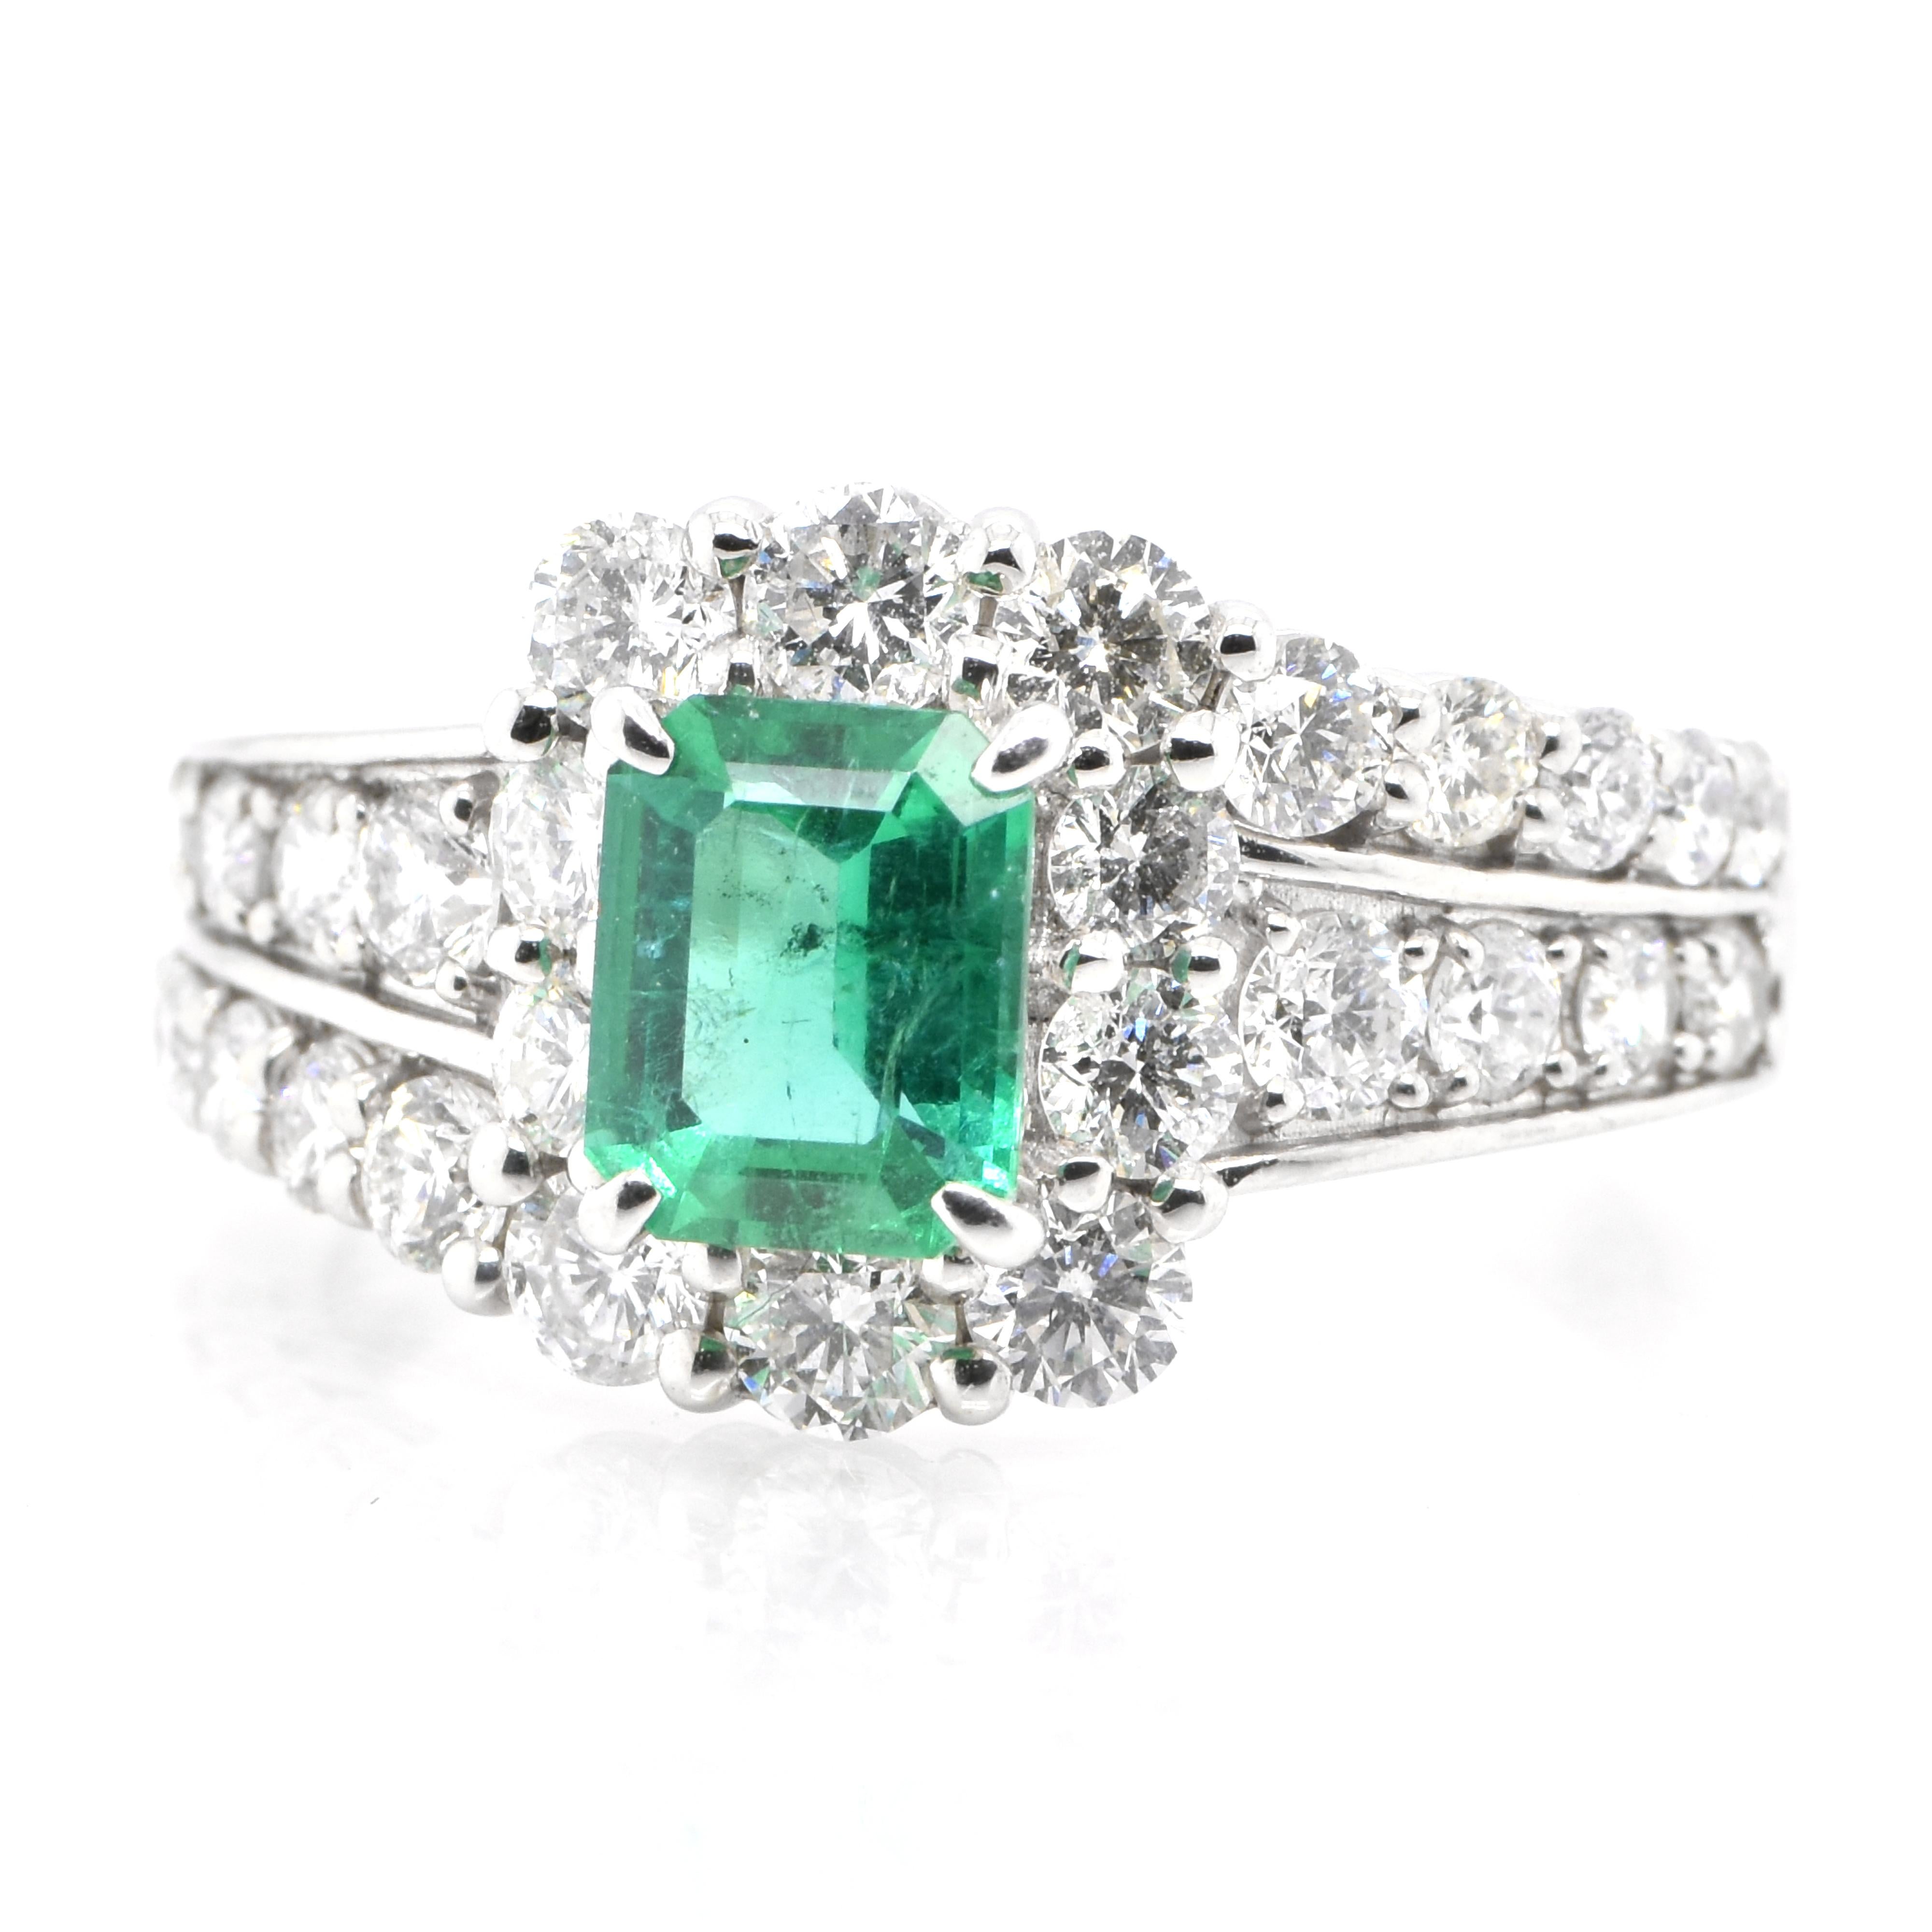 A stunning ring featuring a 0.87 Carat Natural Vivid Green, Emerald and 1.15 Carats of Diamond Accents set in Platinum. People have admired emerald’s green for thousands of years. Emeralds have always been associated with the lushest landscapes and